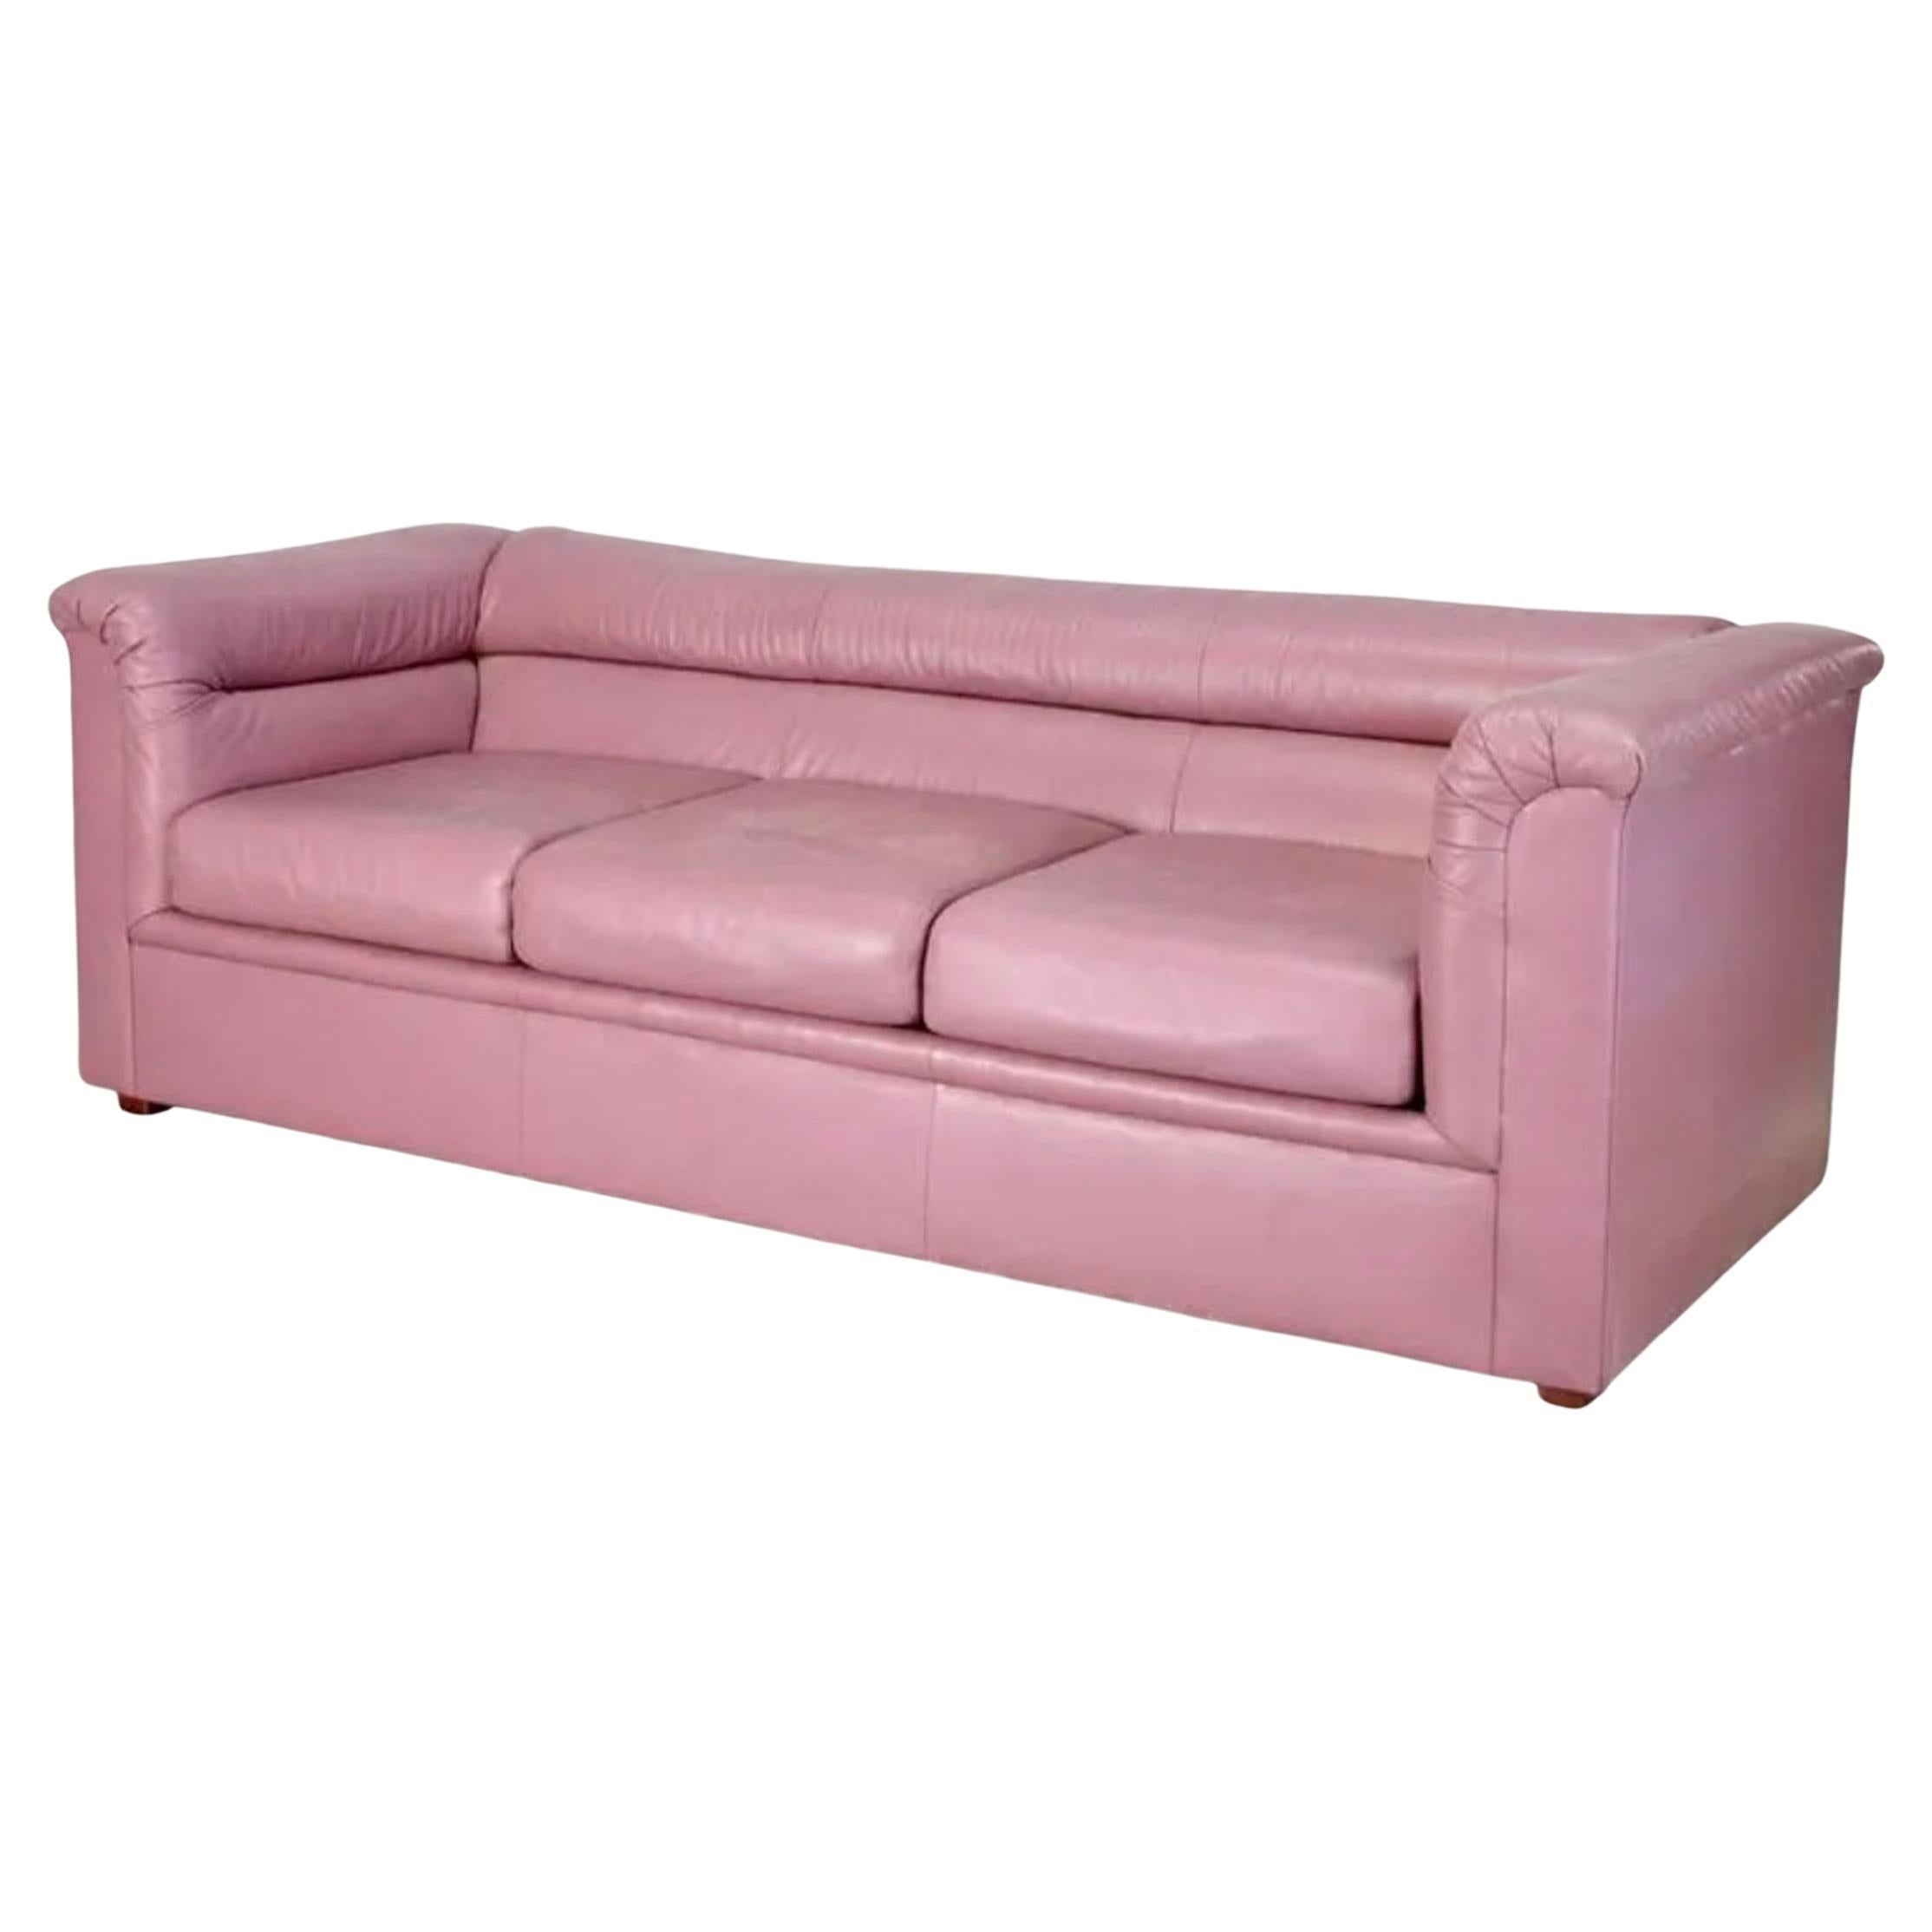 Midcentury Post Modern 3 Seat Mauve Pink Leather Puffy Sofa 1980s Selig For Sale